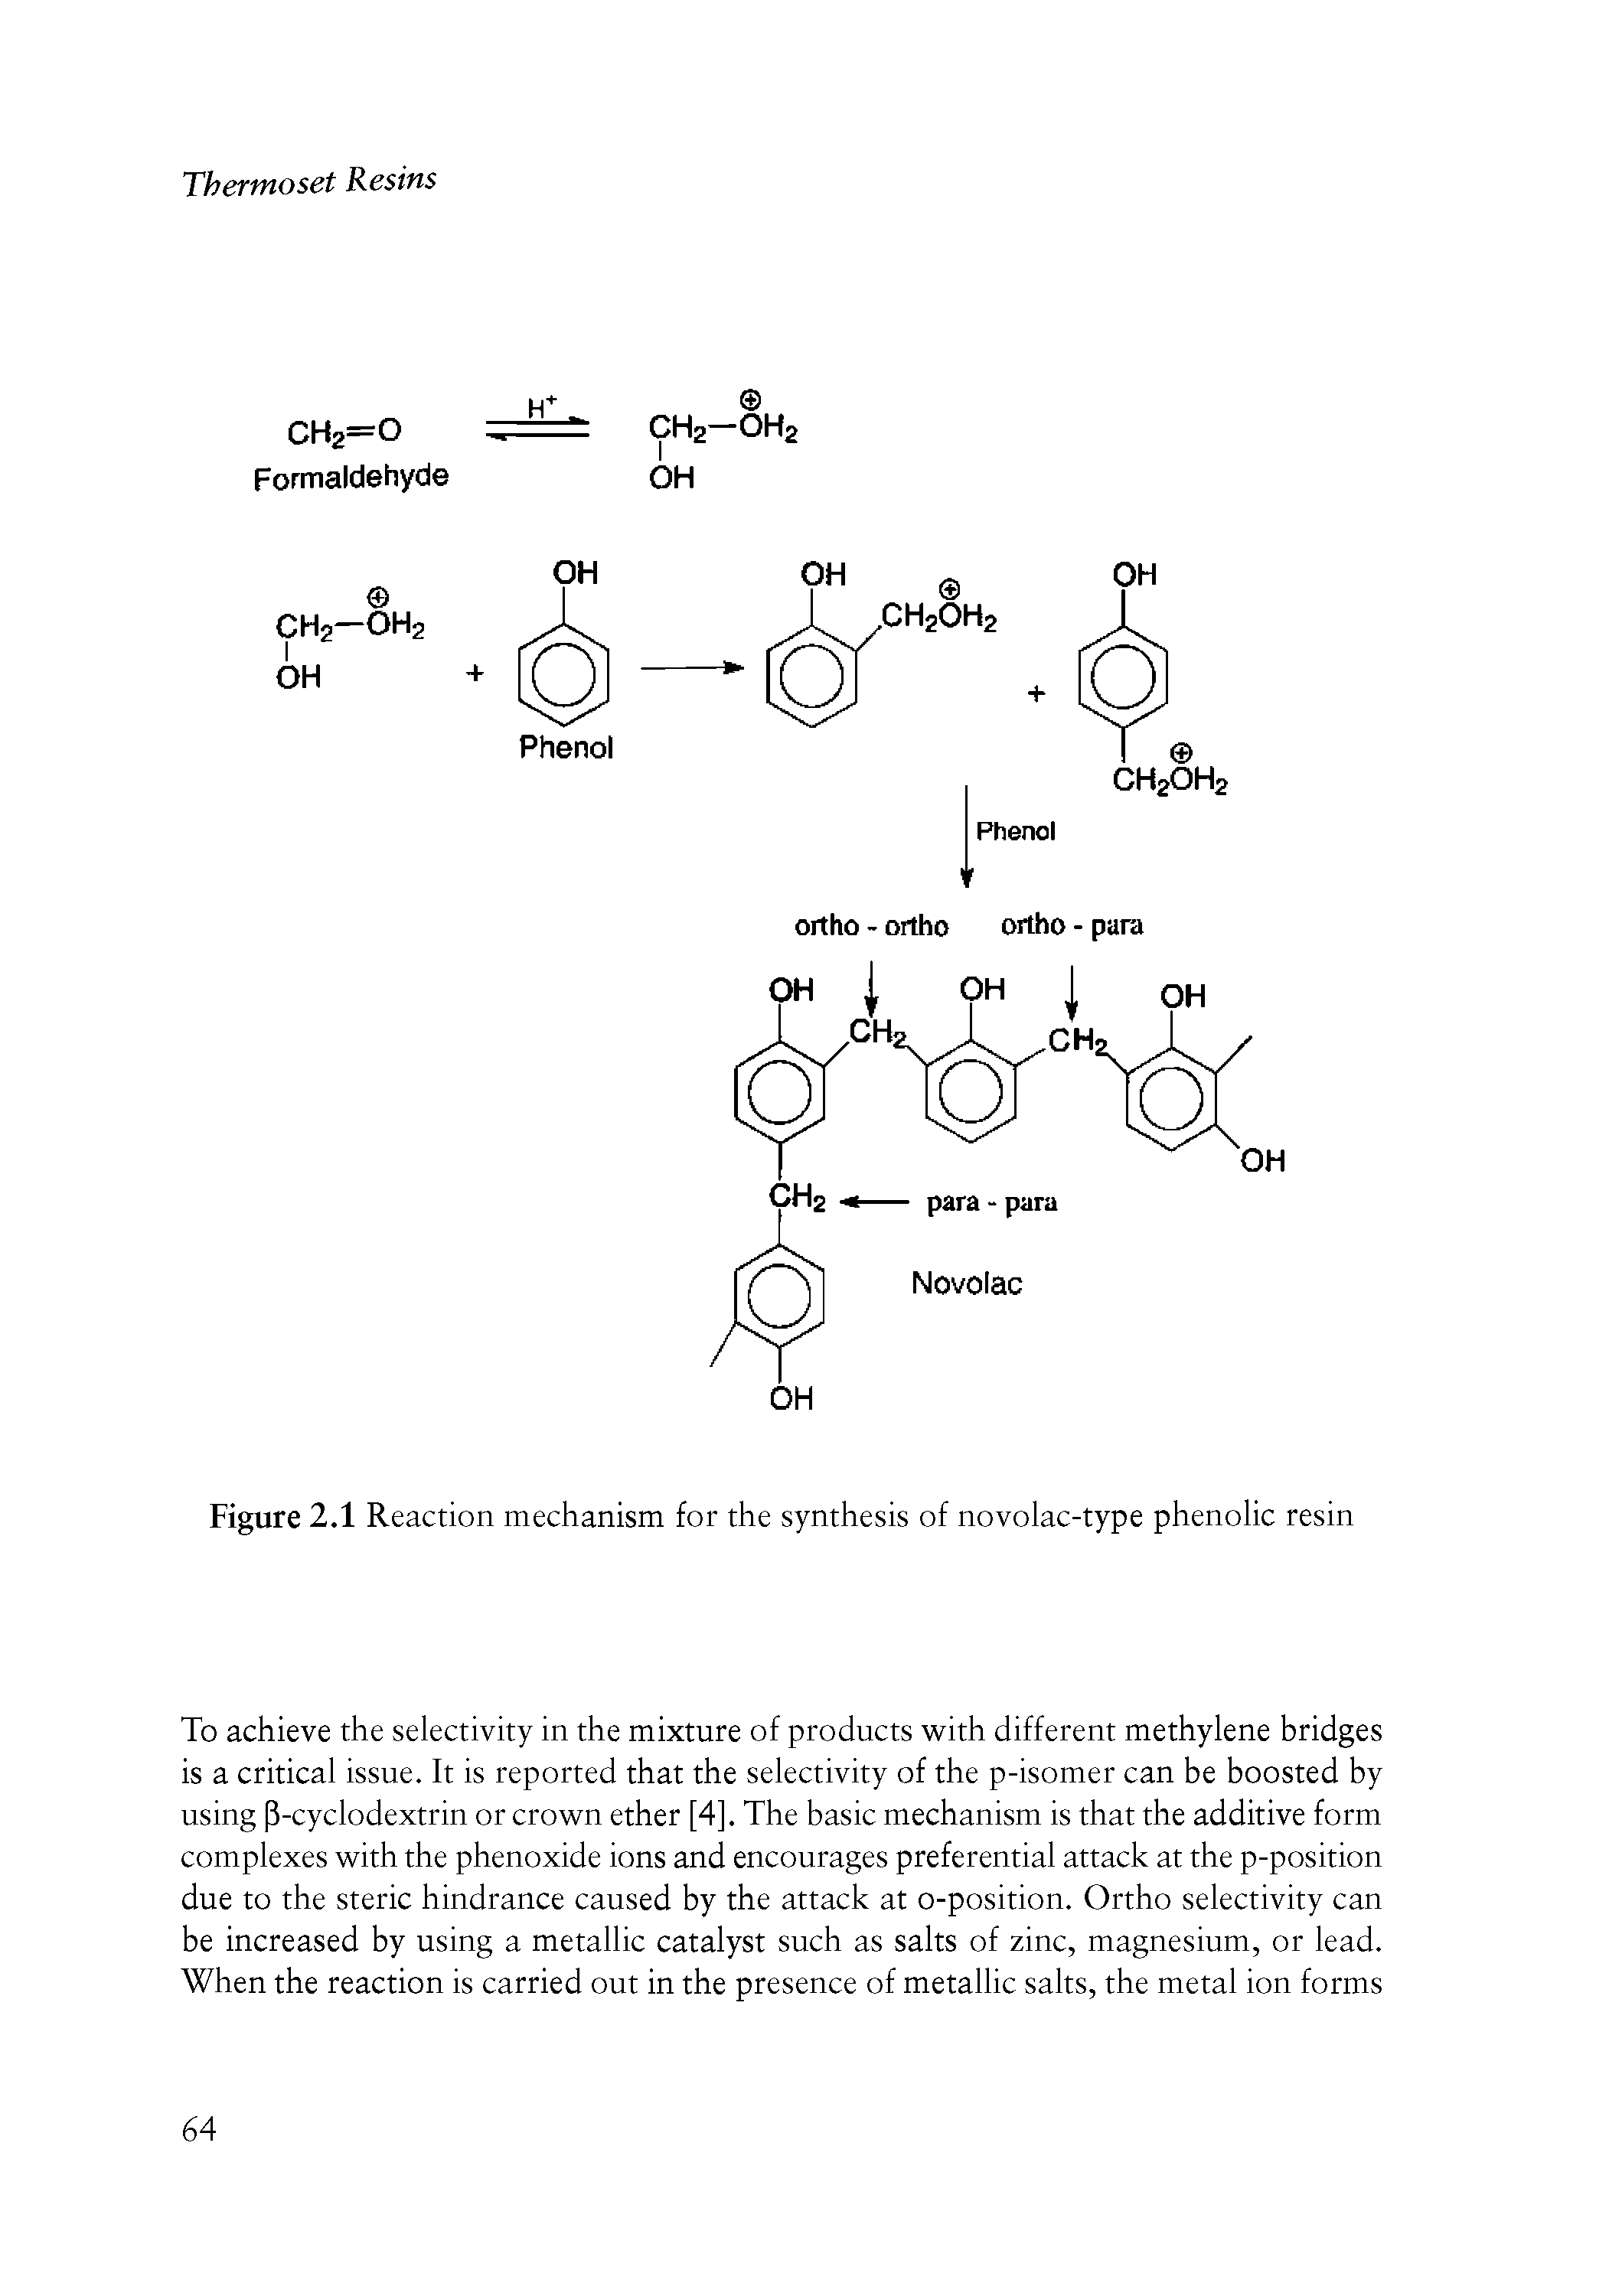 Figure 2.1 Reaction mechanism for the synthesis of novolac-type phenolic resin...